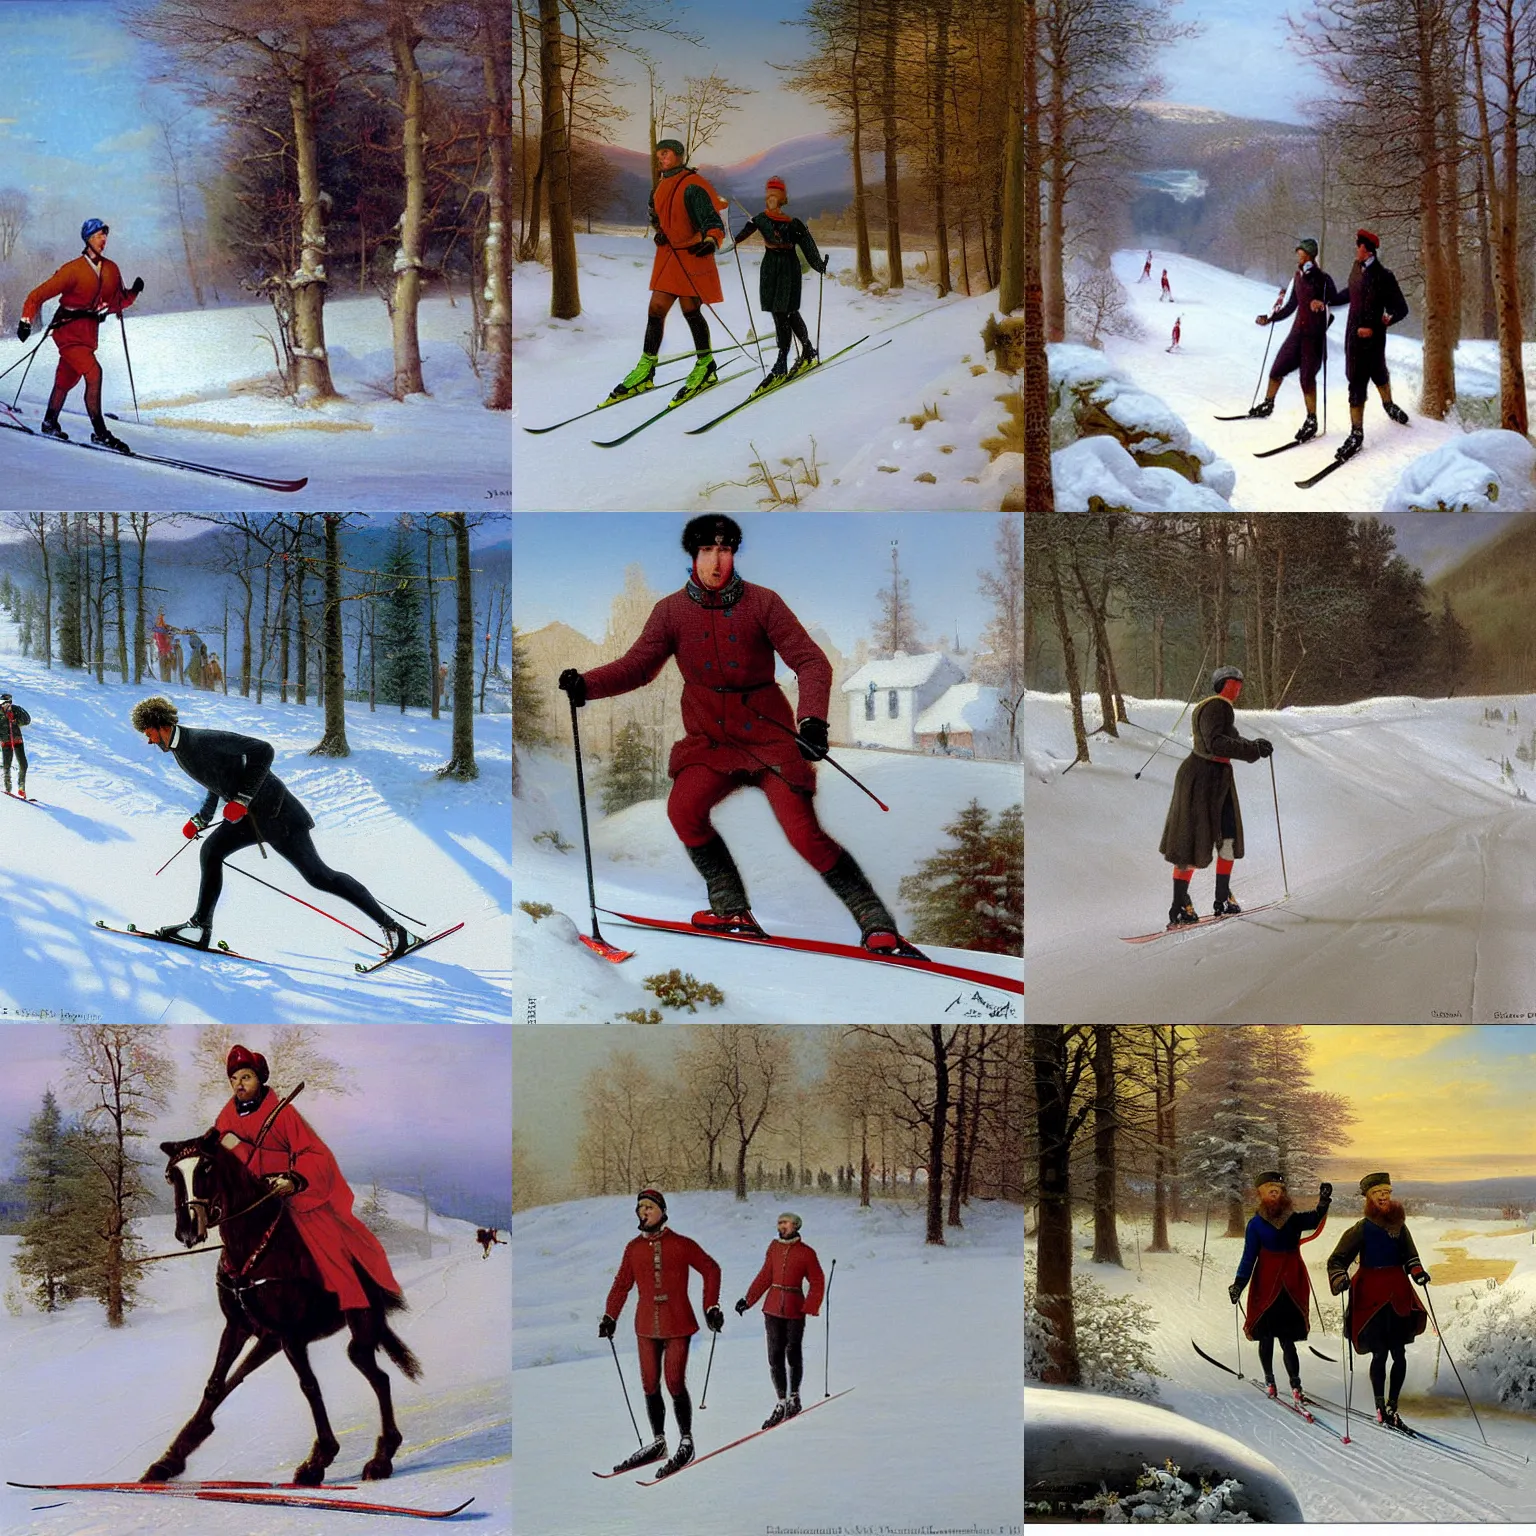 Prompt: painting of jens Stoltenberg cross country skiing by edmund blair Leighton